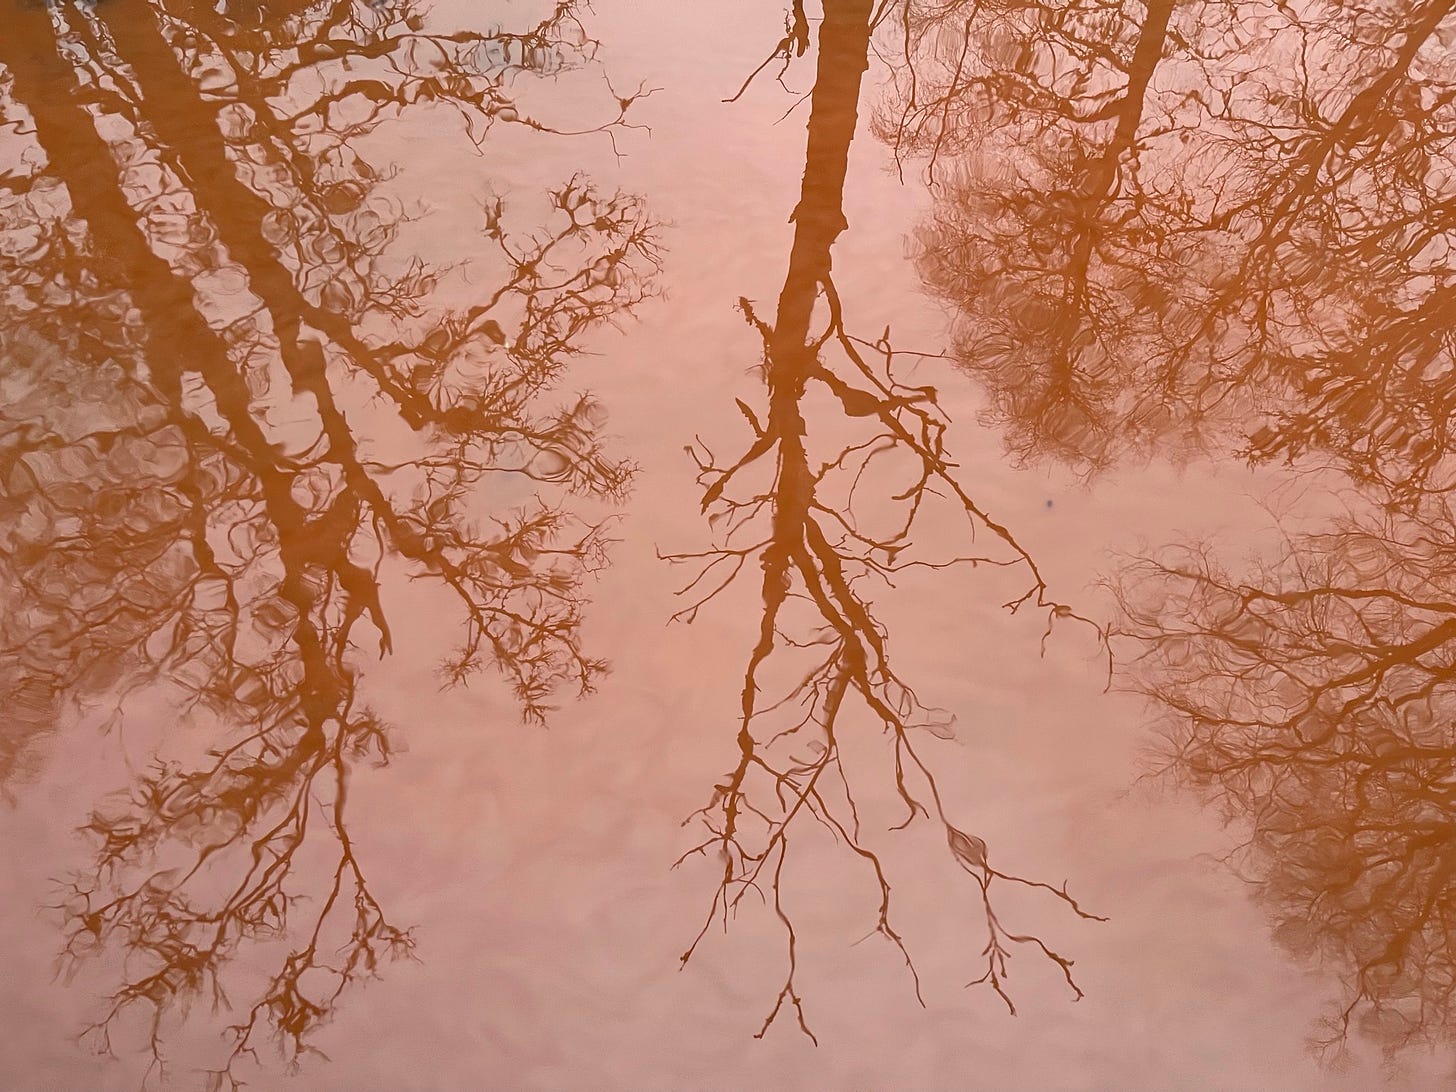 Orange puddles on a sandstone track mirror and reflect bare branched winter trees